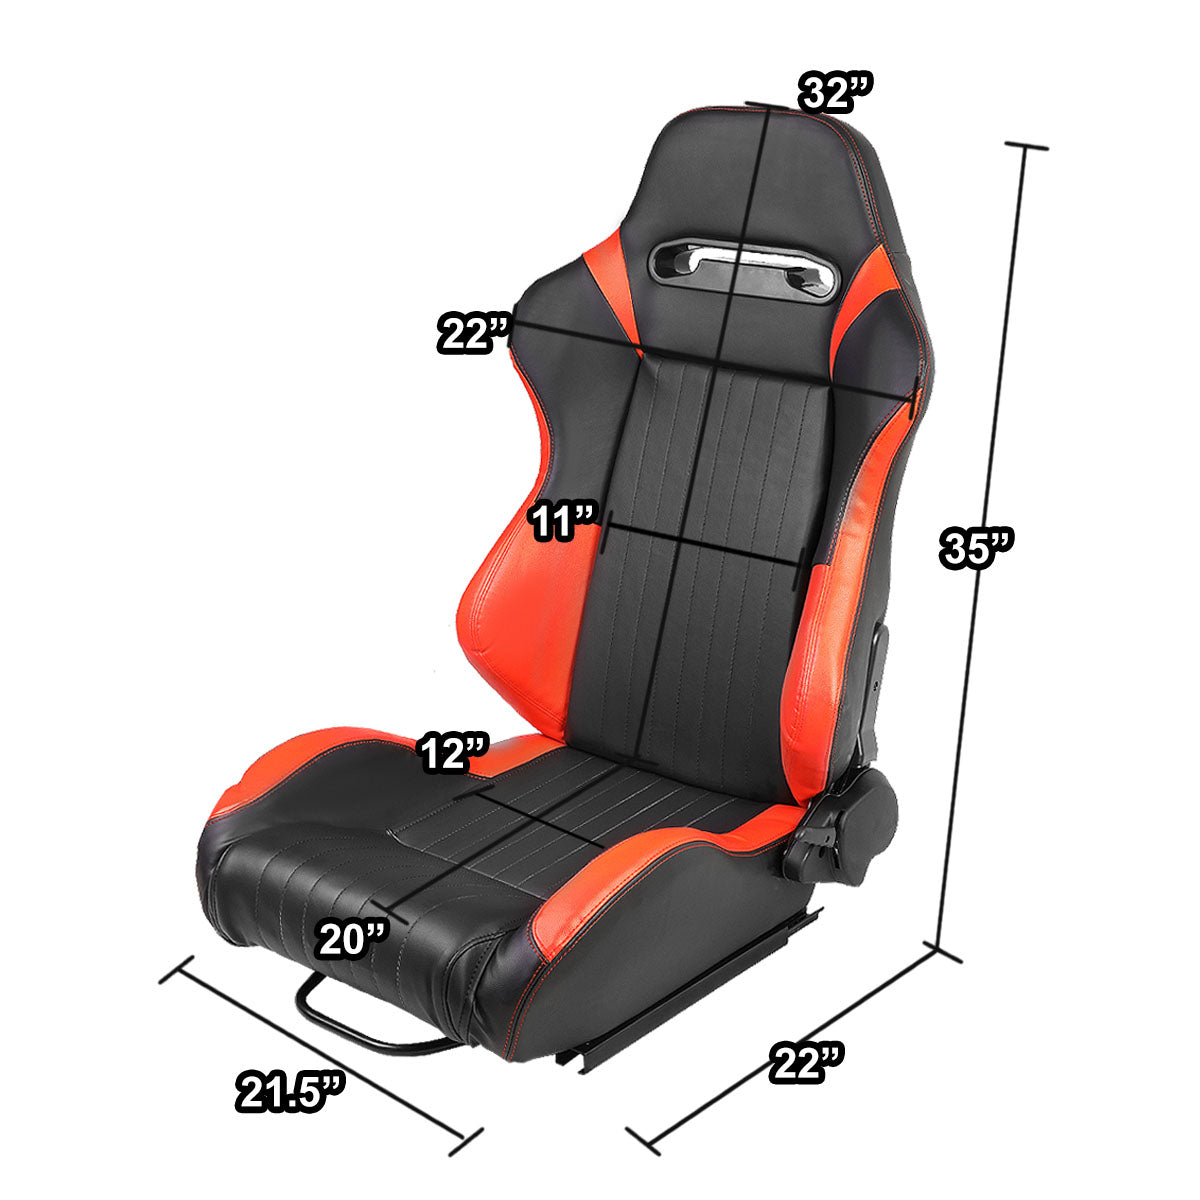 Racing Seats - Reclinable - Vertical Stitch - PVC Leather - Pair